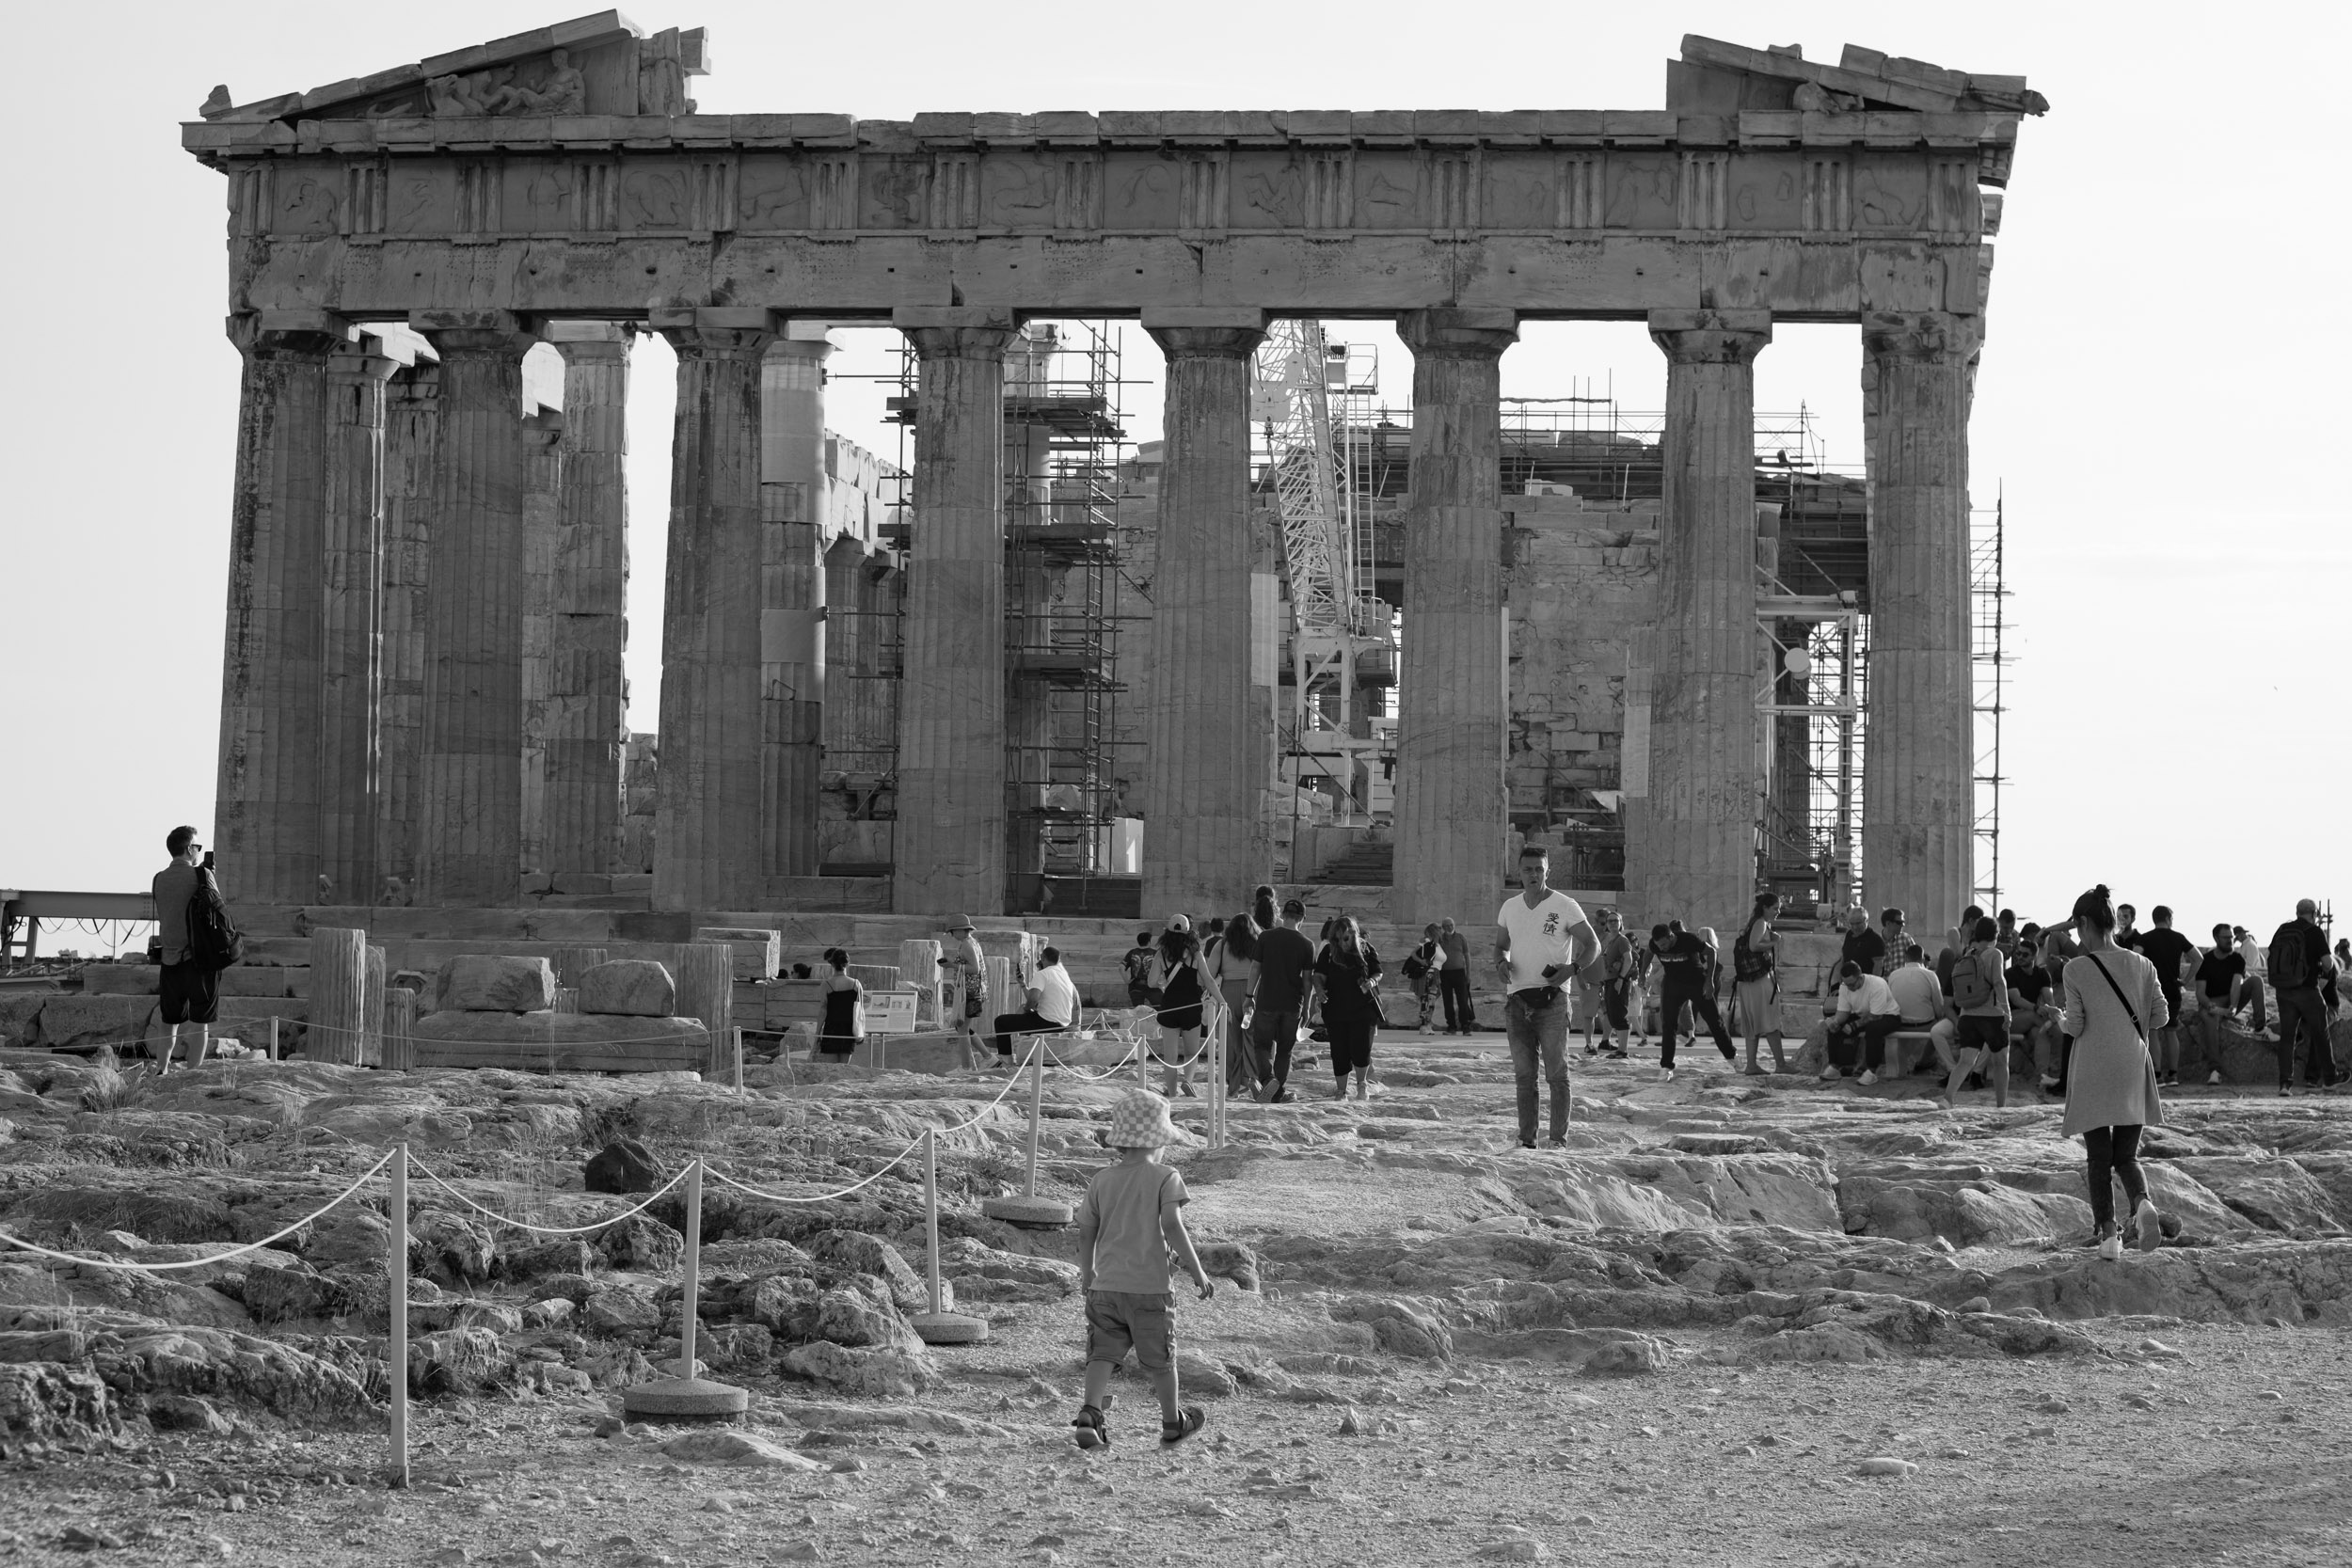 My son walking in front of the Parthenon, a former temple on the Athenian Acropolis.